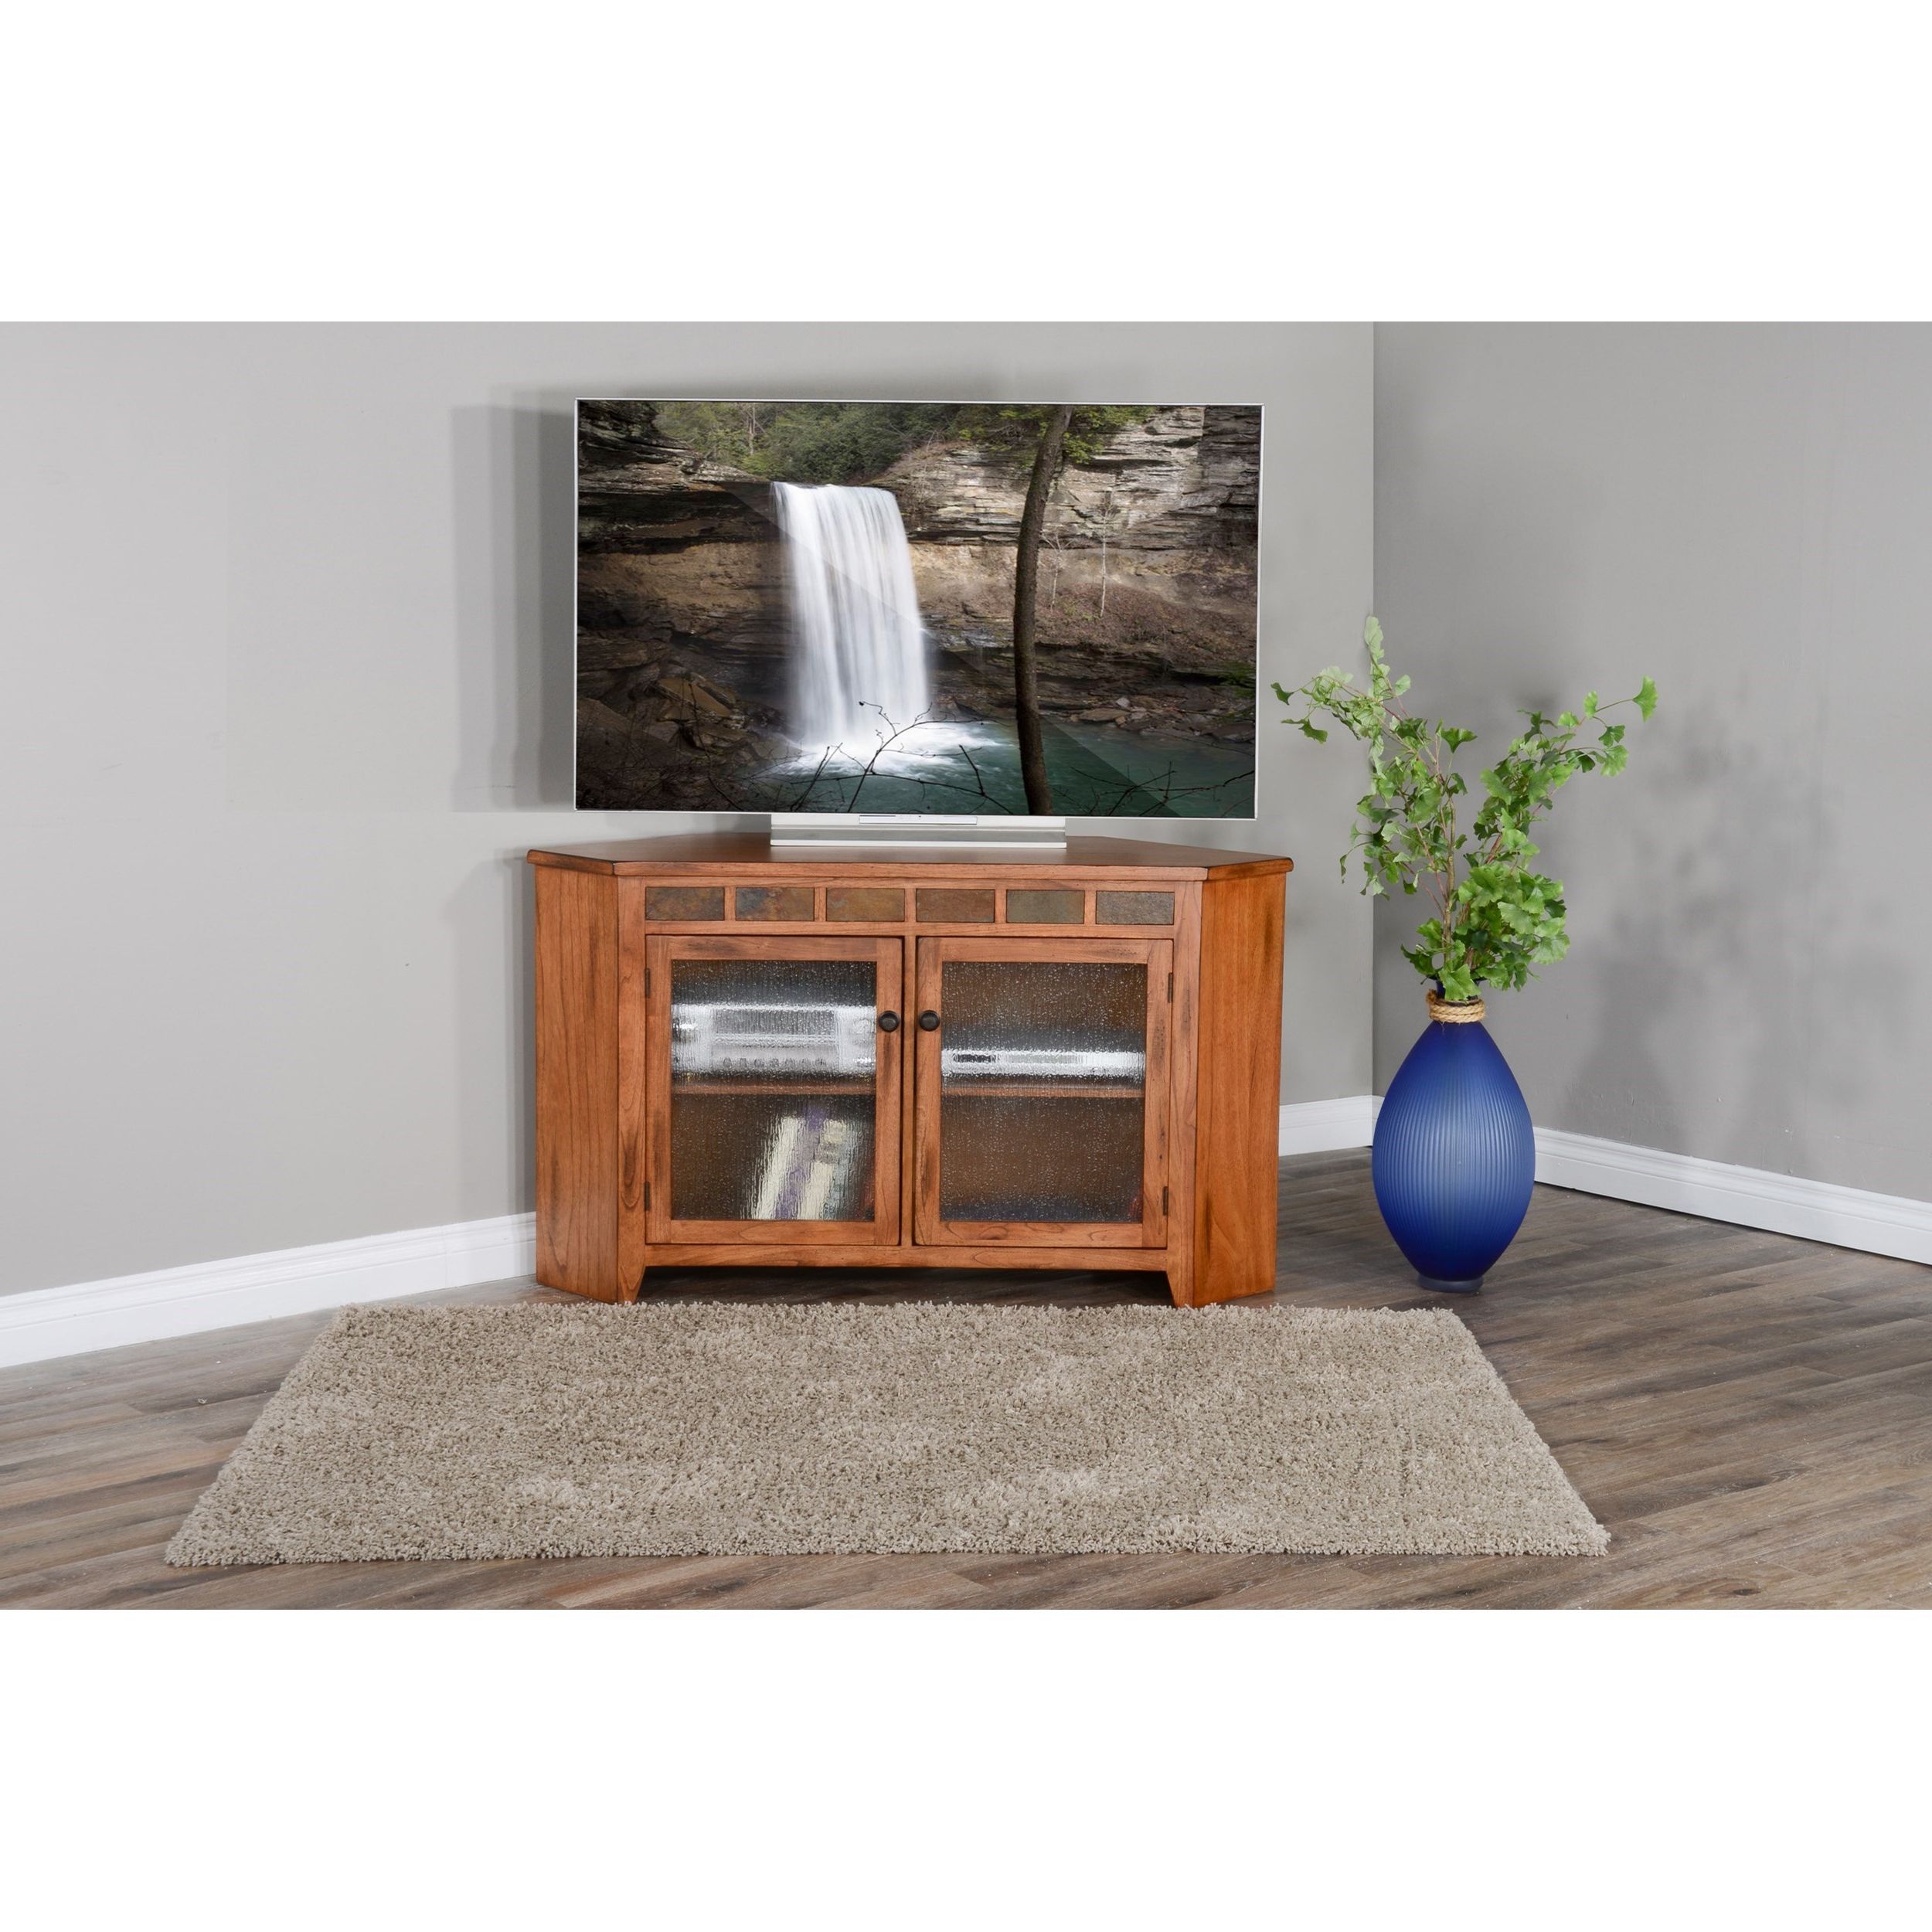 Sunny Designs Sedona 2 55" Corner Tv Stand With Glass Regarding Widely Used Modern 2 Glass Door Corner Tv Stands (View 10 of 10)